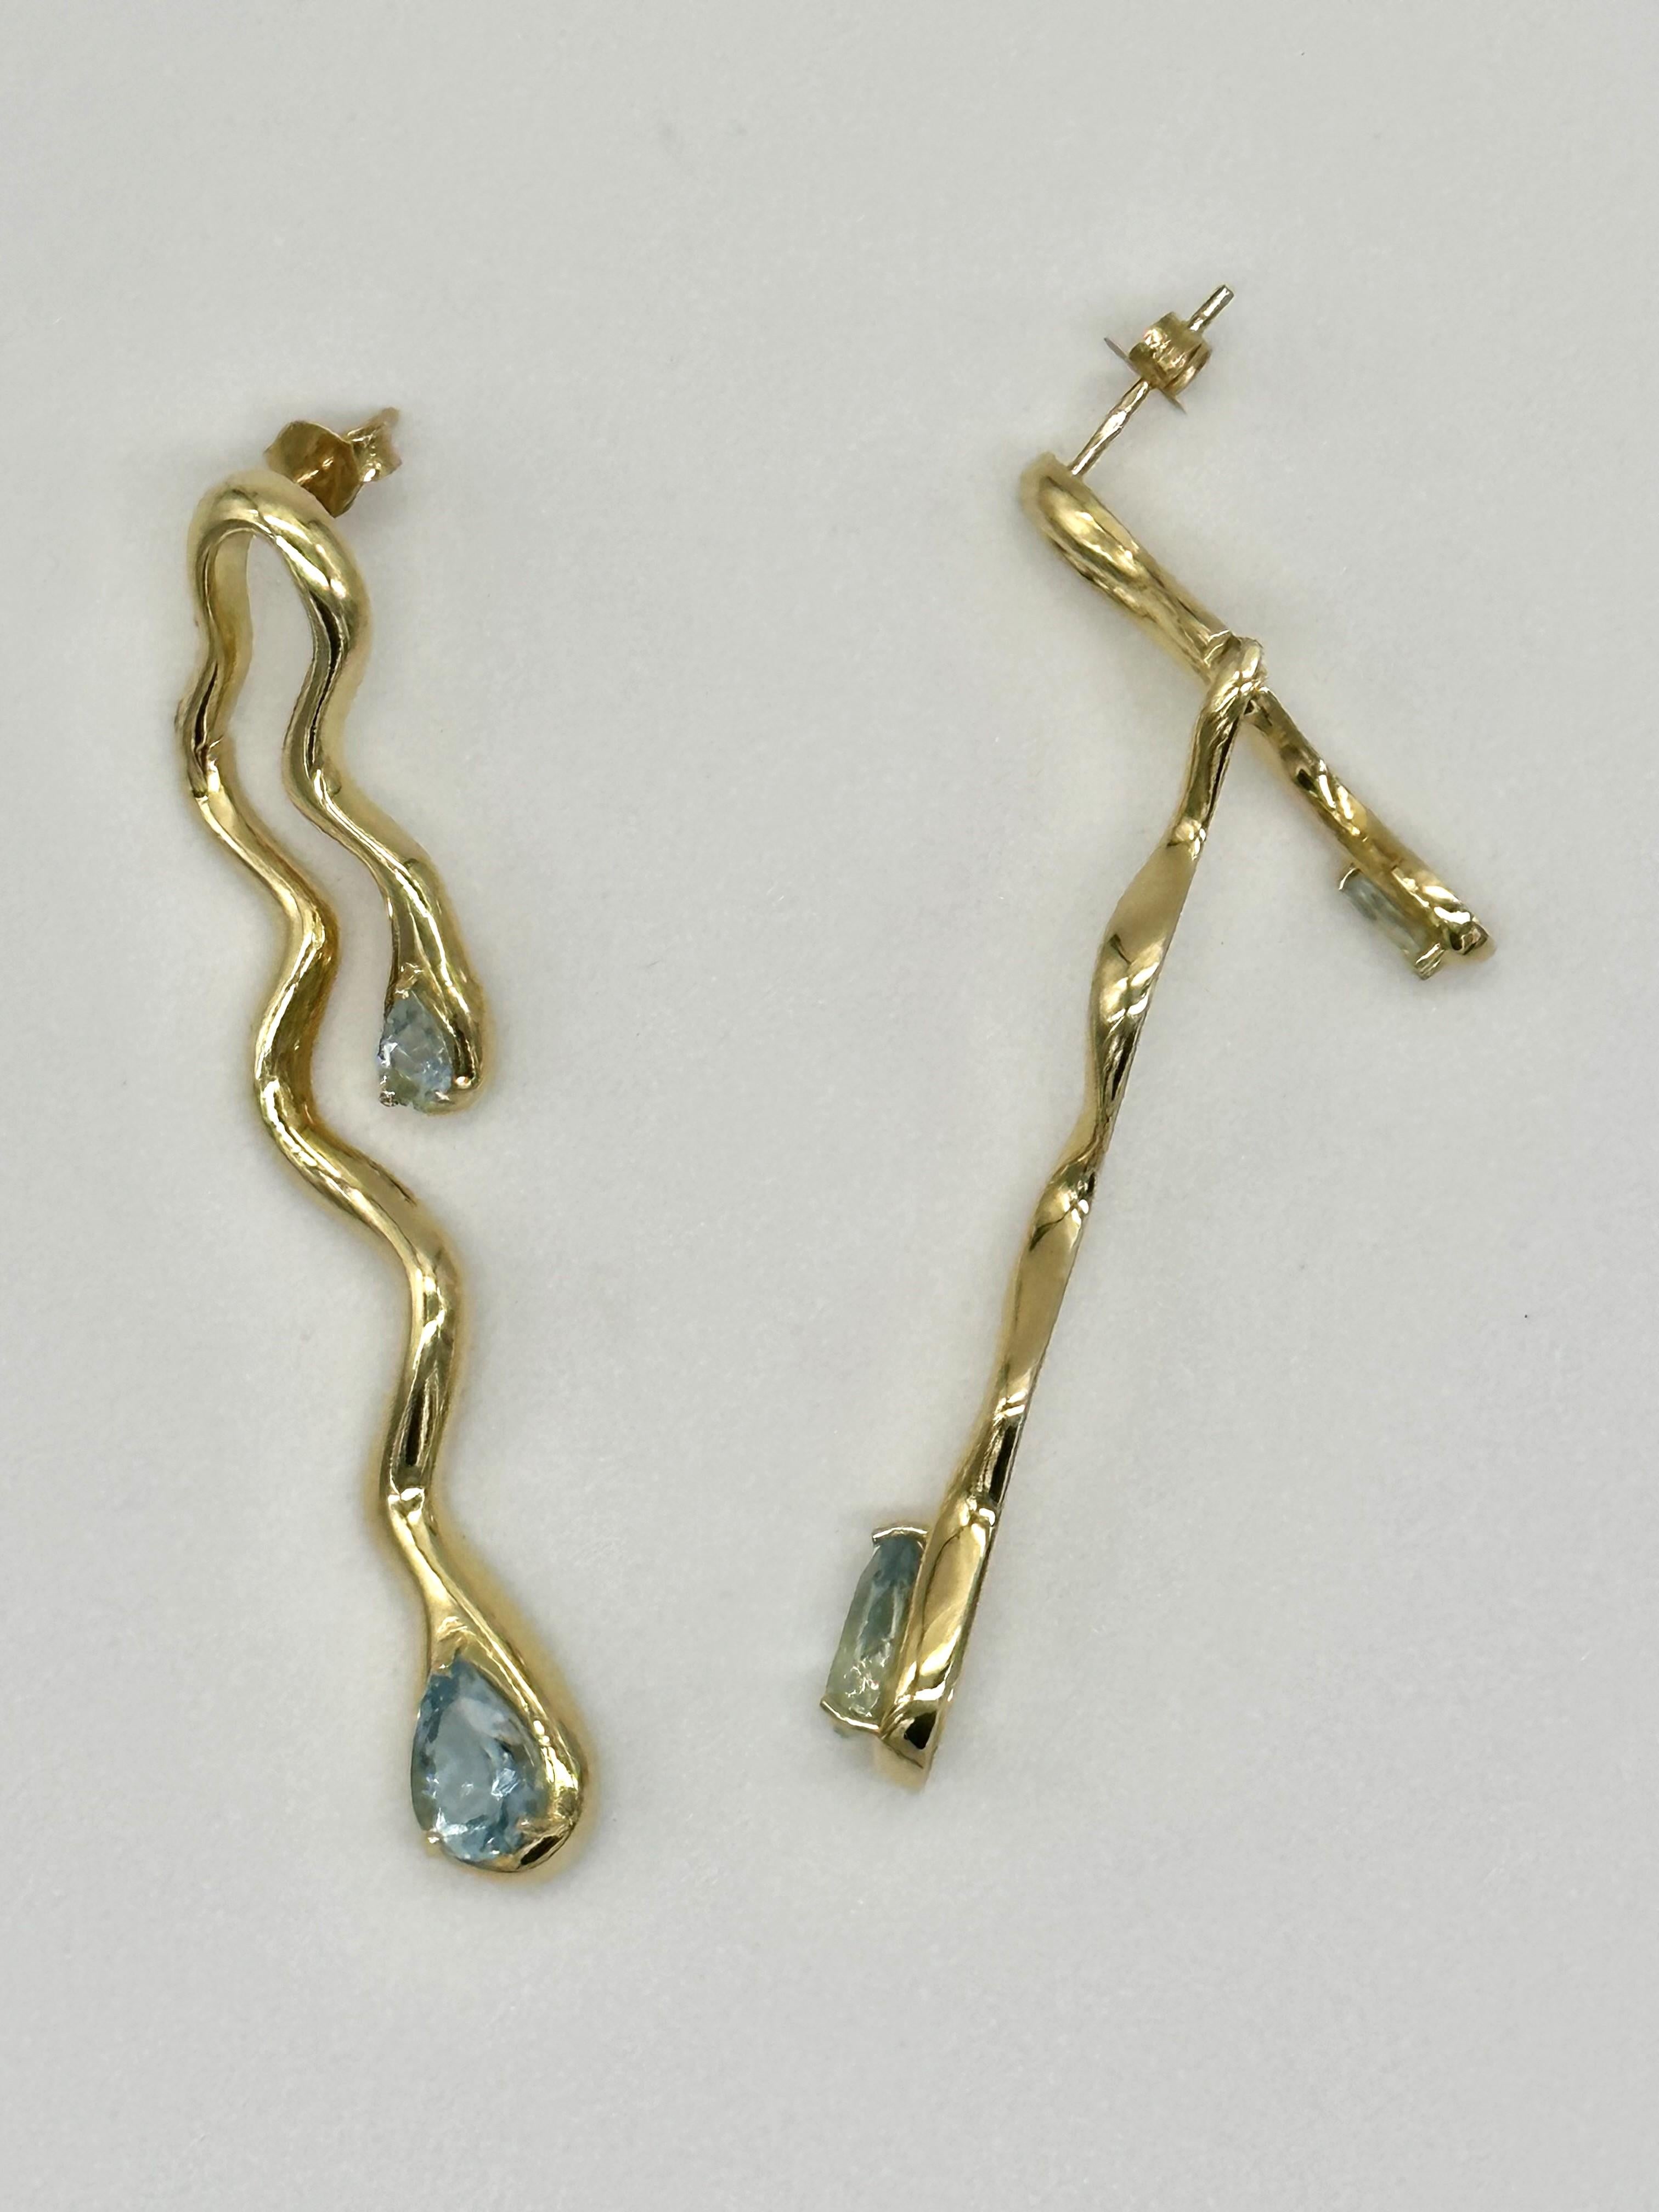 Long, articulated earrings in 18kt gold and 3.76 carat Aquamarine For Sale 3